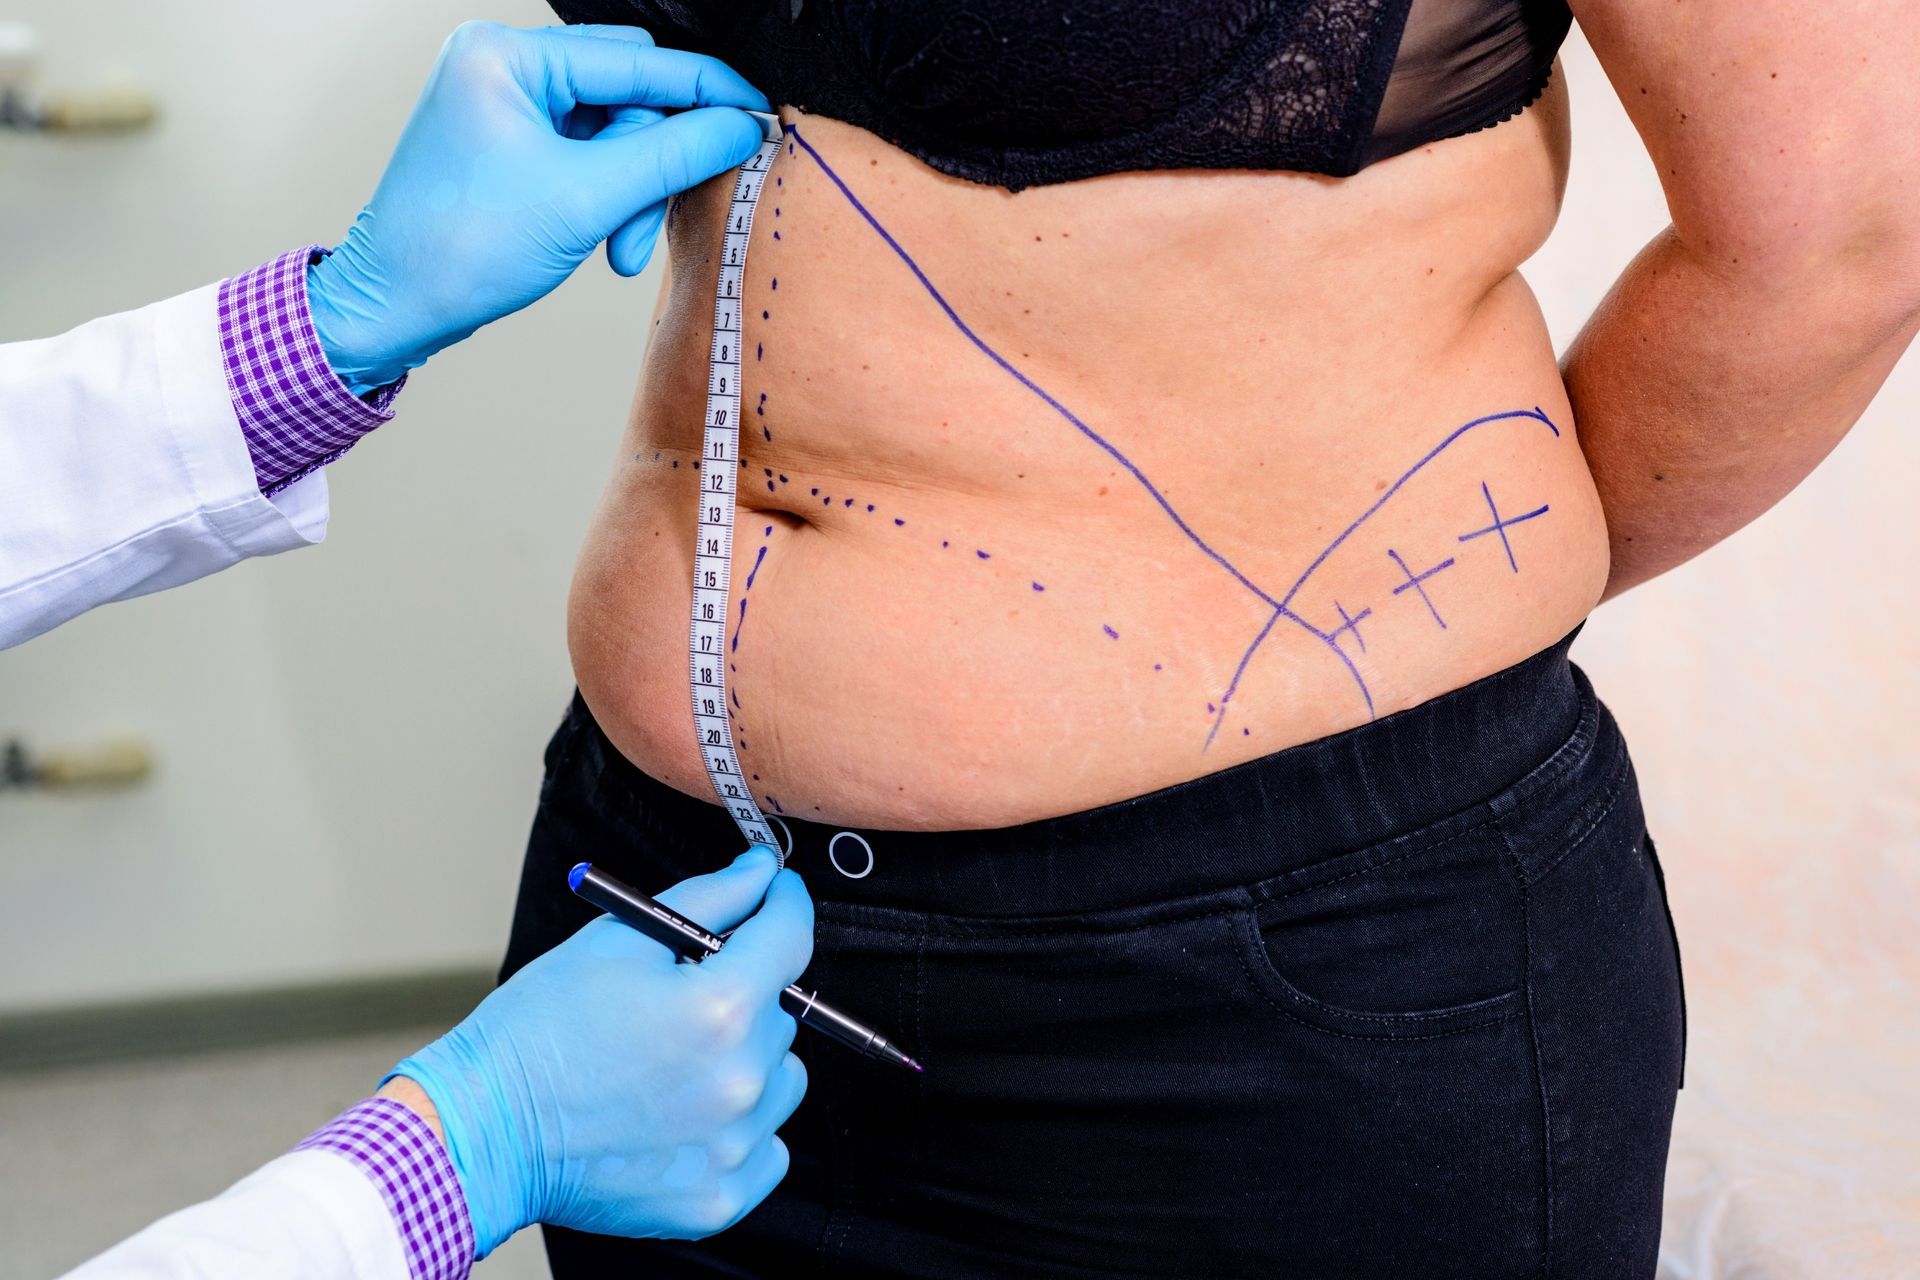 From Flab to Fab: The Ultimate Guide to Tummy Tuck Surgery!